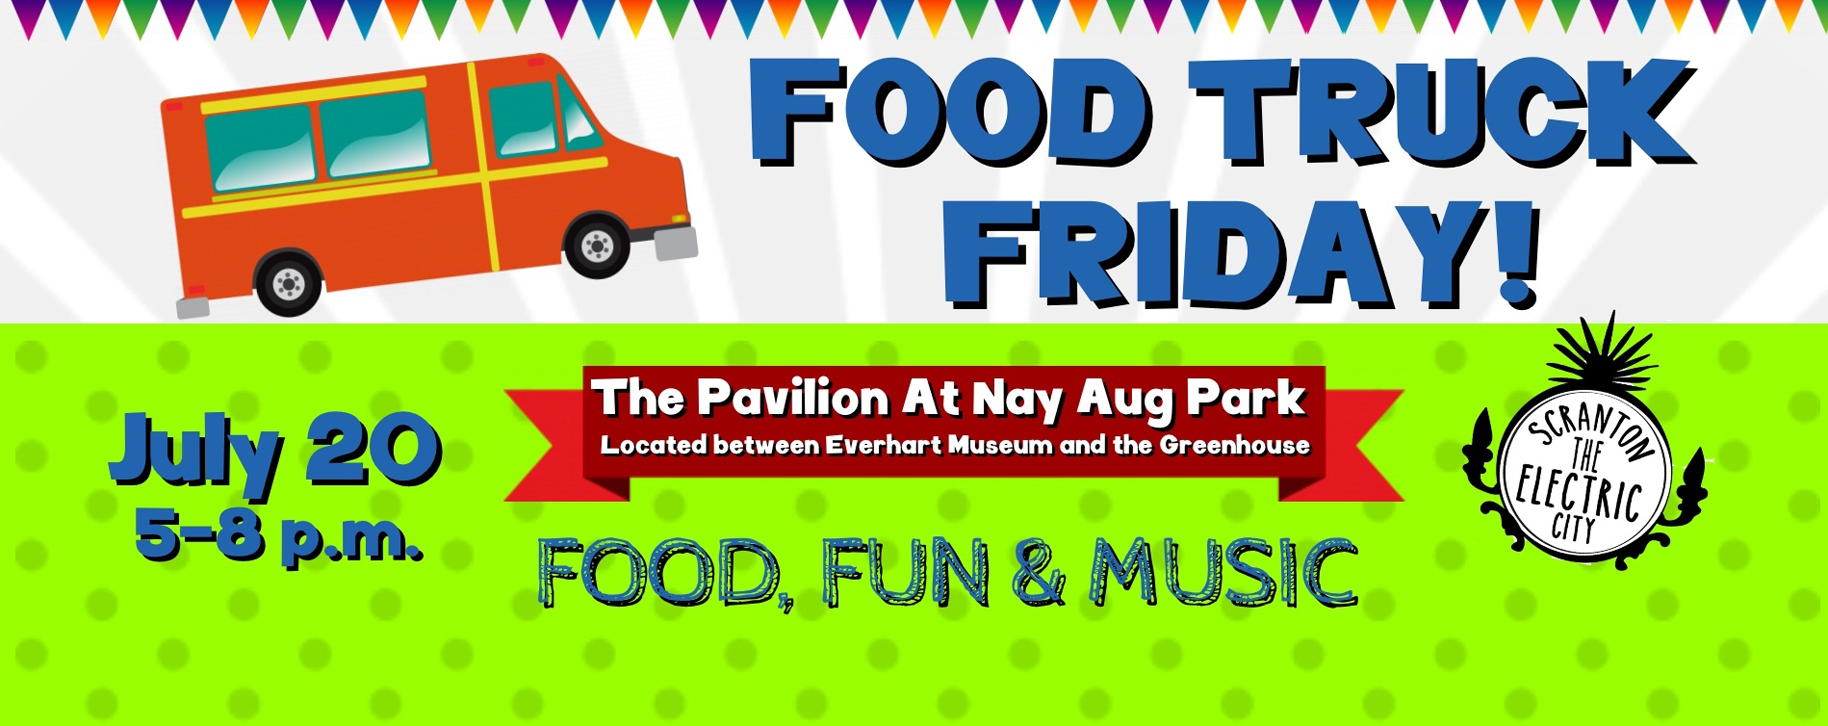 Food Truck Friday image